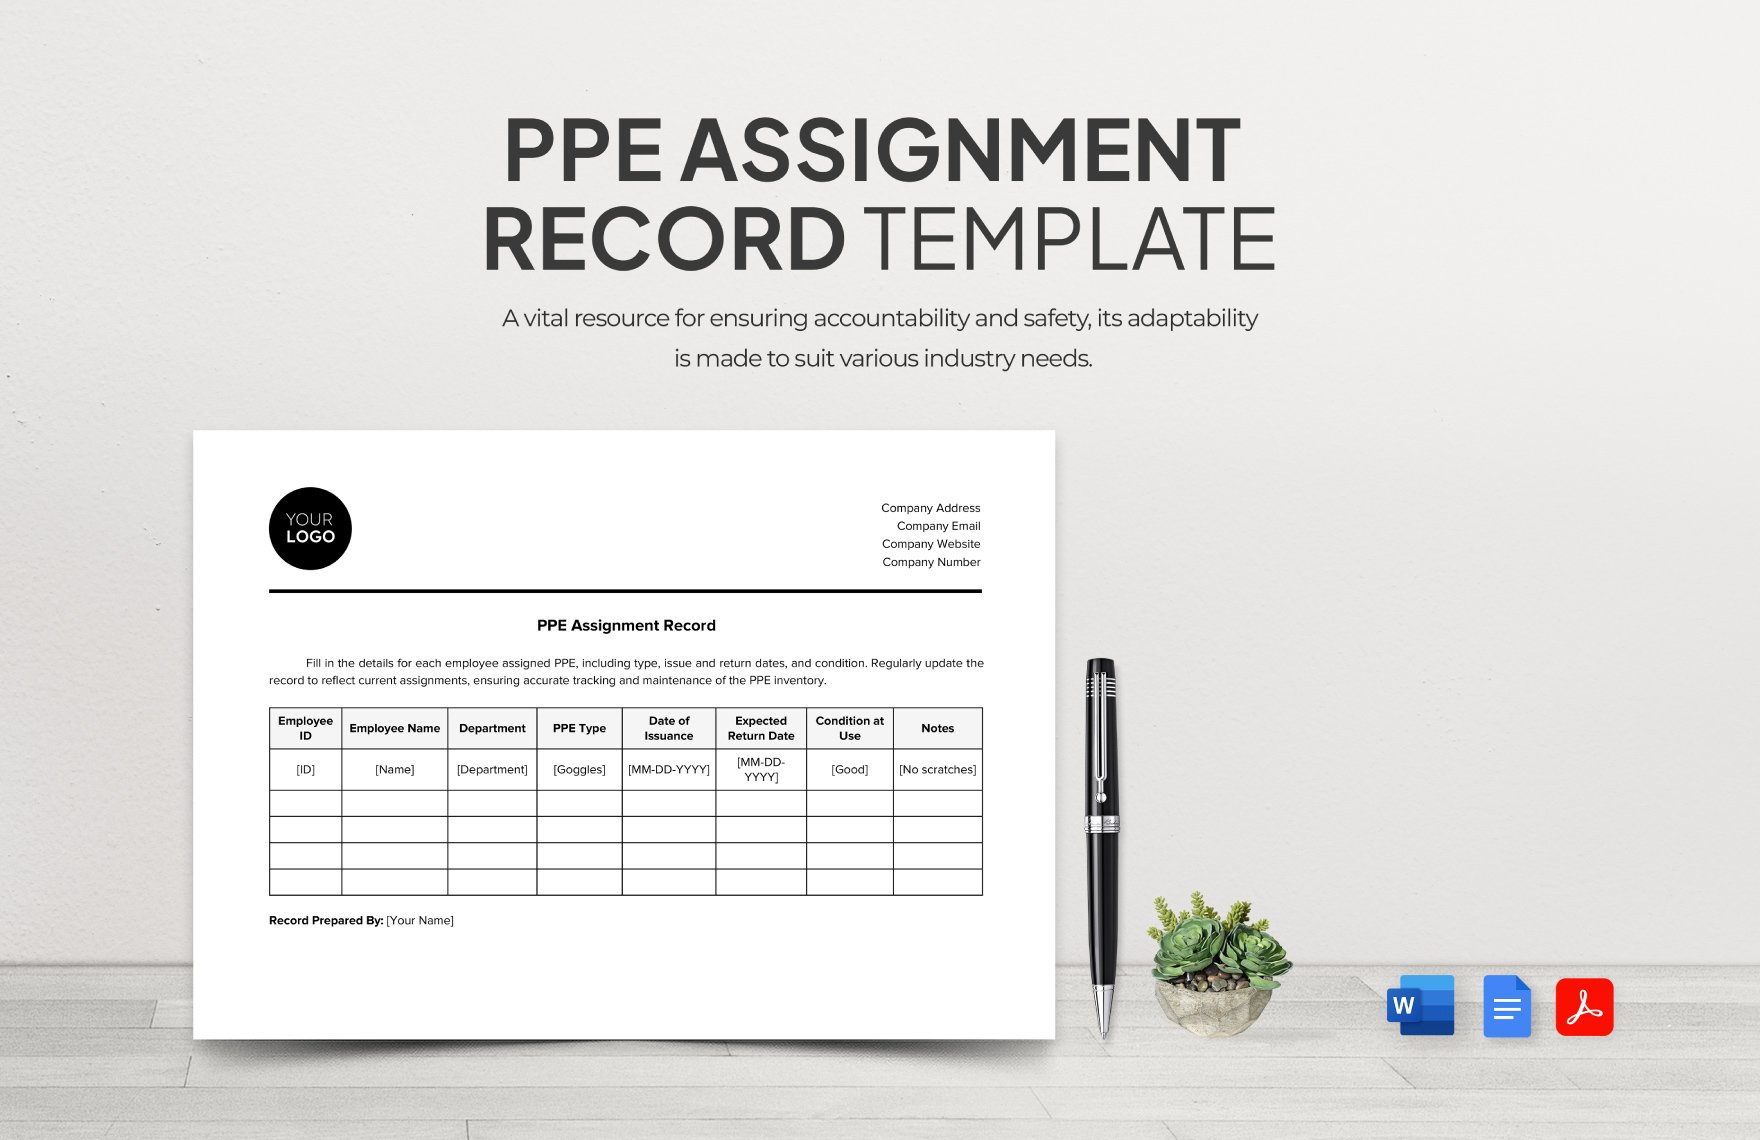 PPE Assignment Record Template